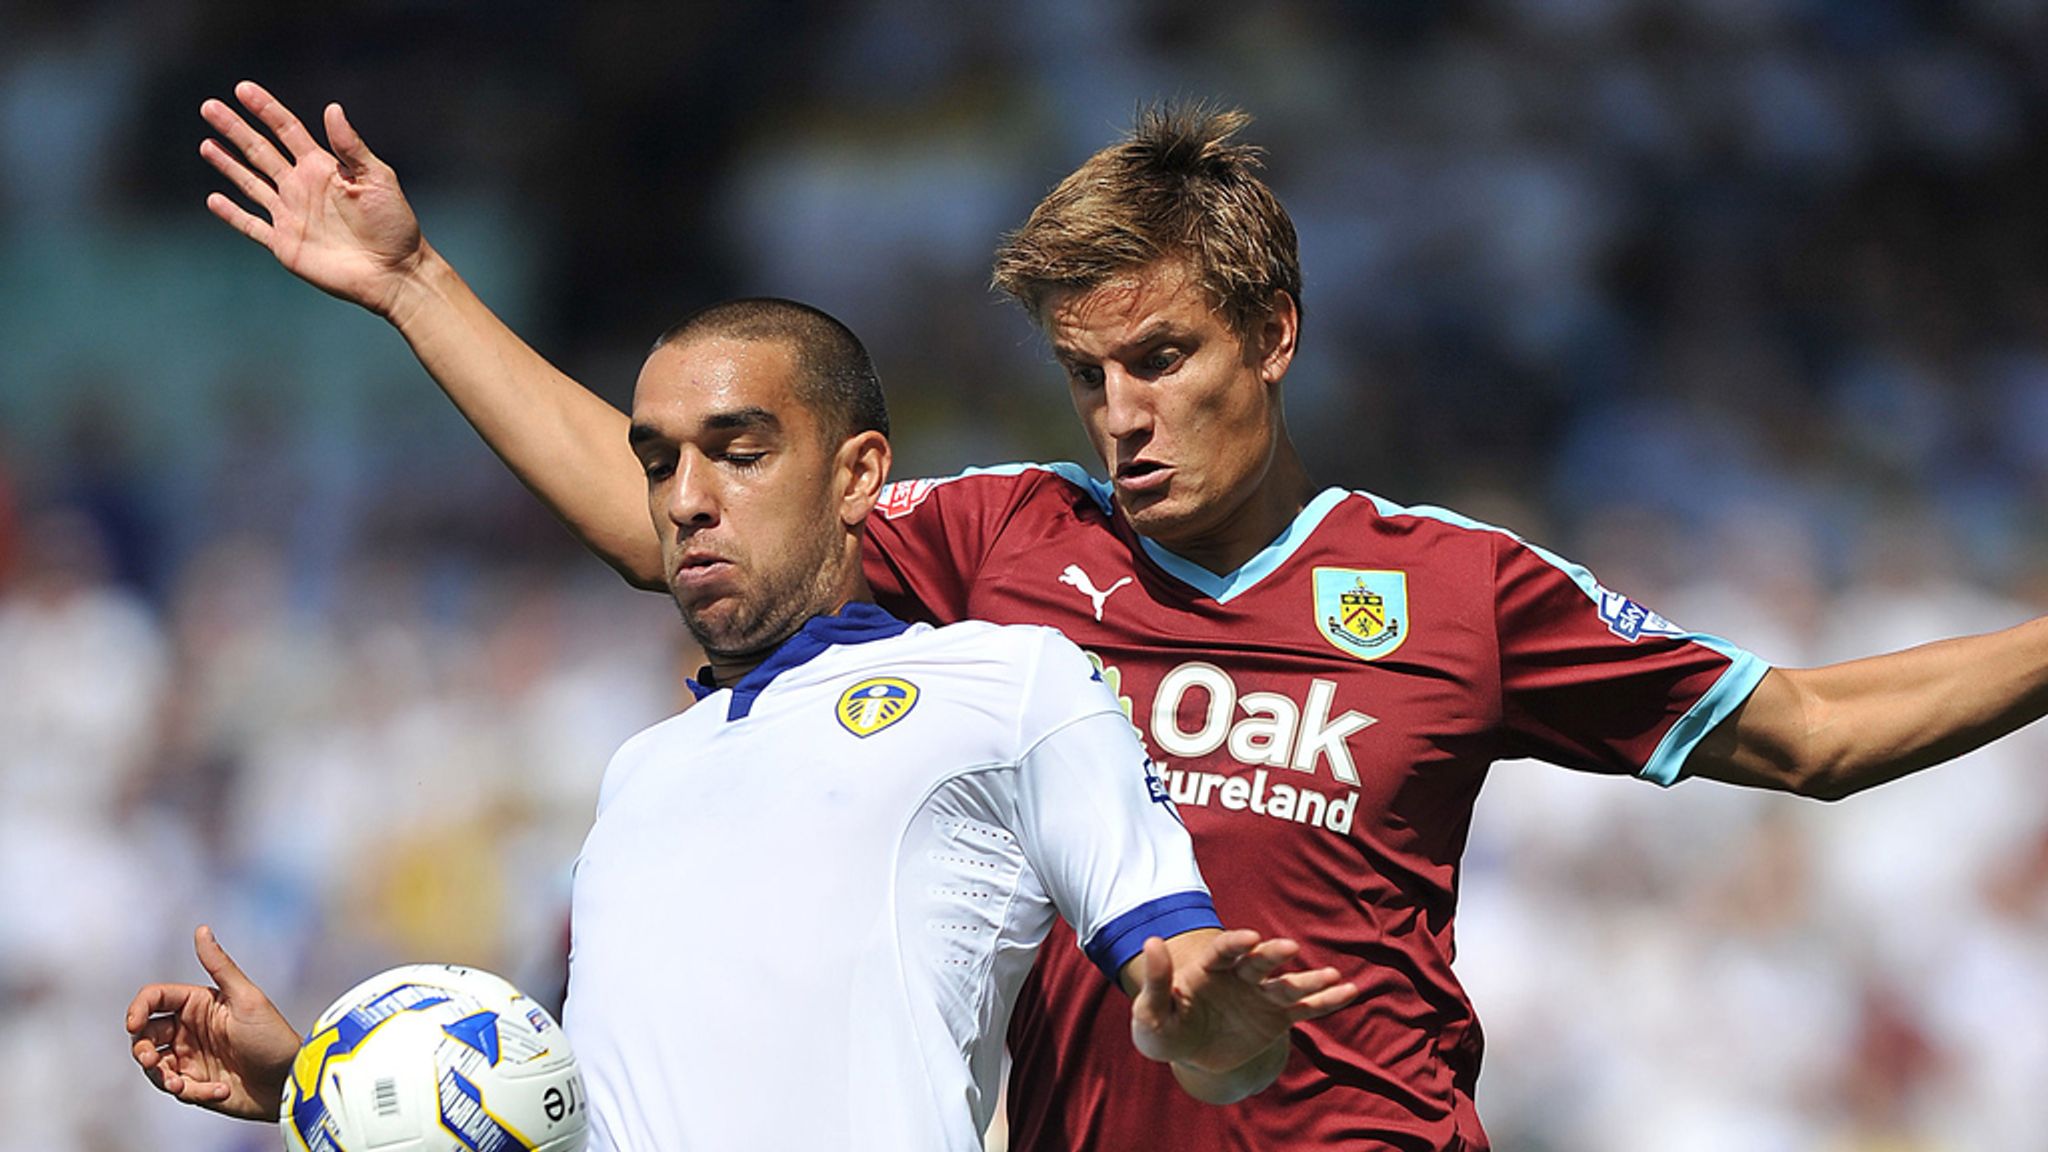 Leeds 1-1 Burnley: Reaction from Uwe Rosler and Sean Dyche ...